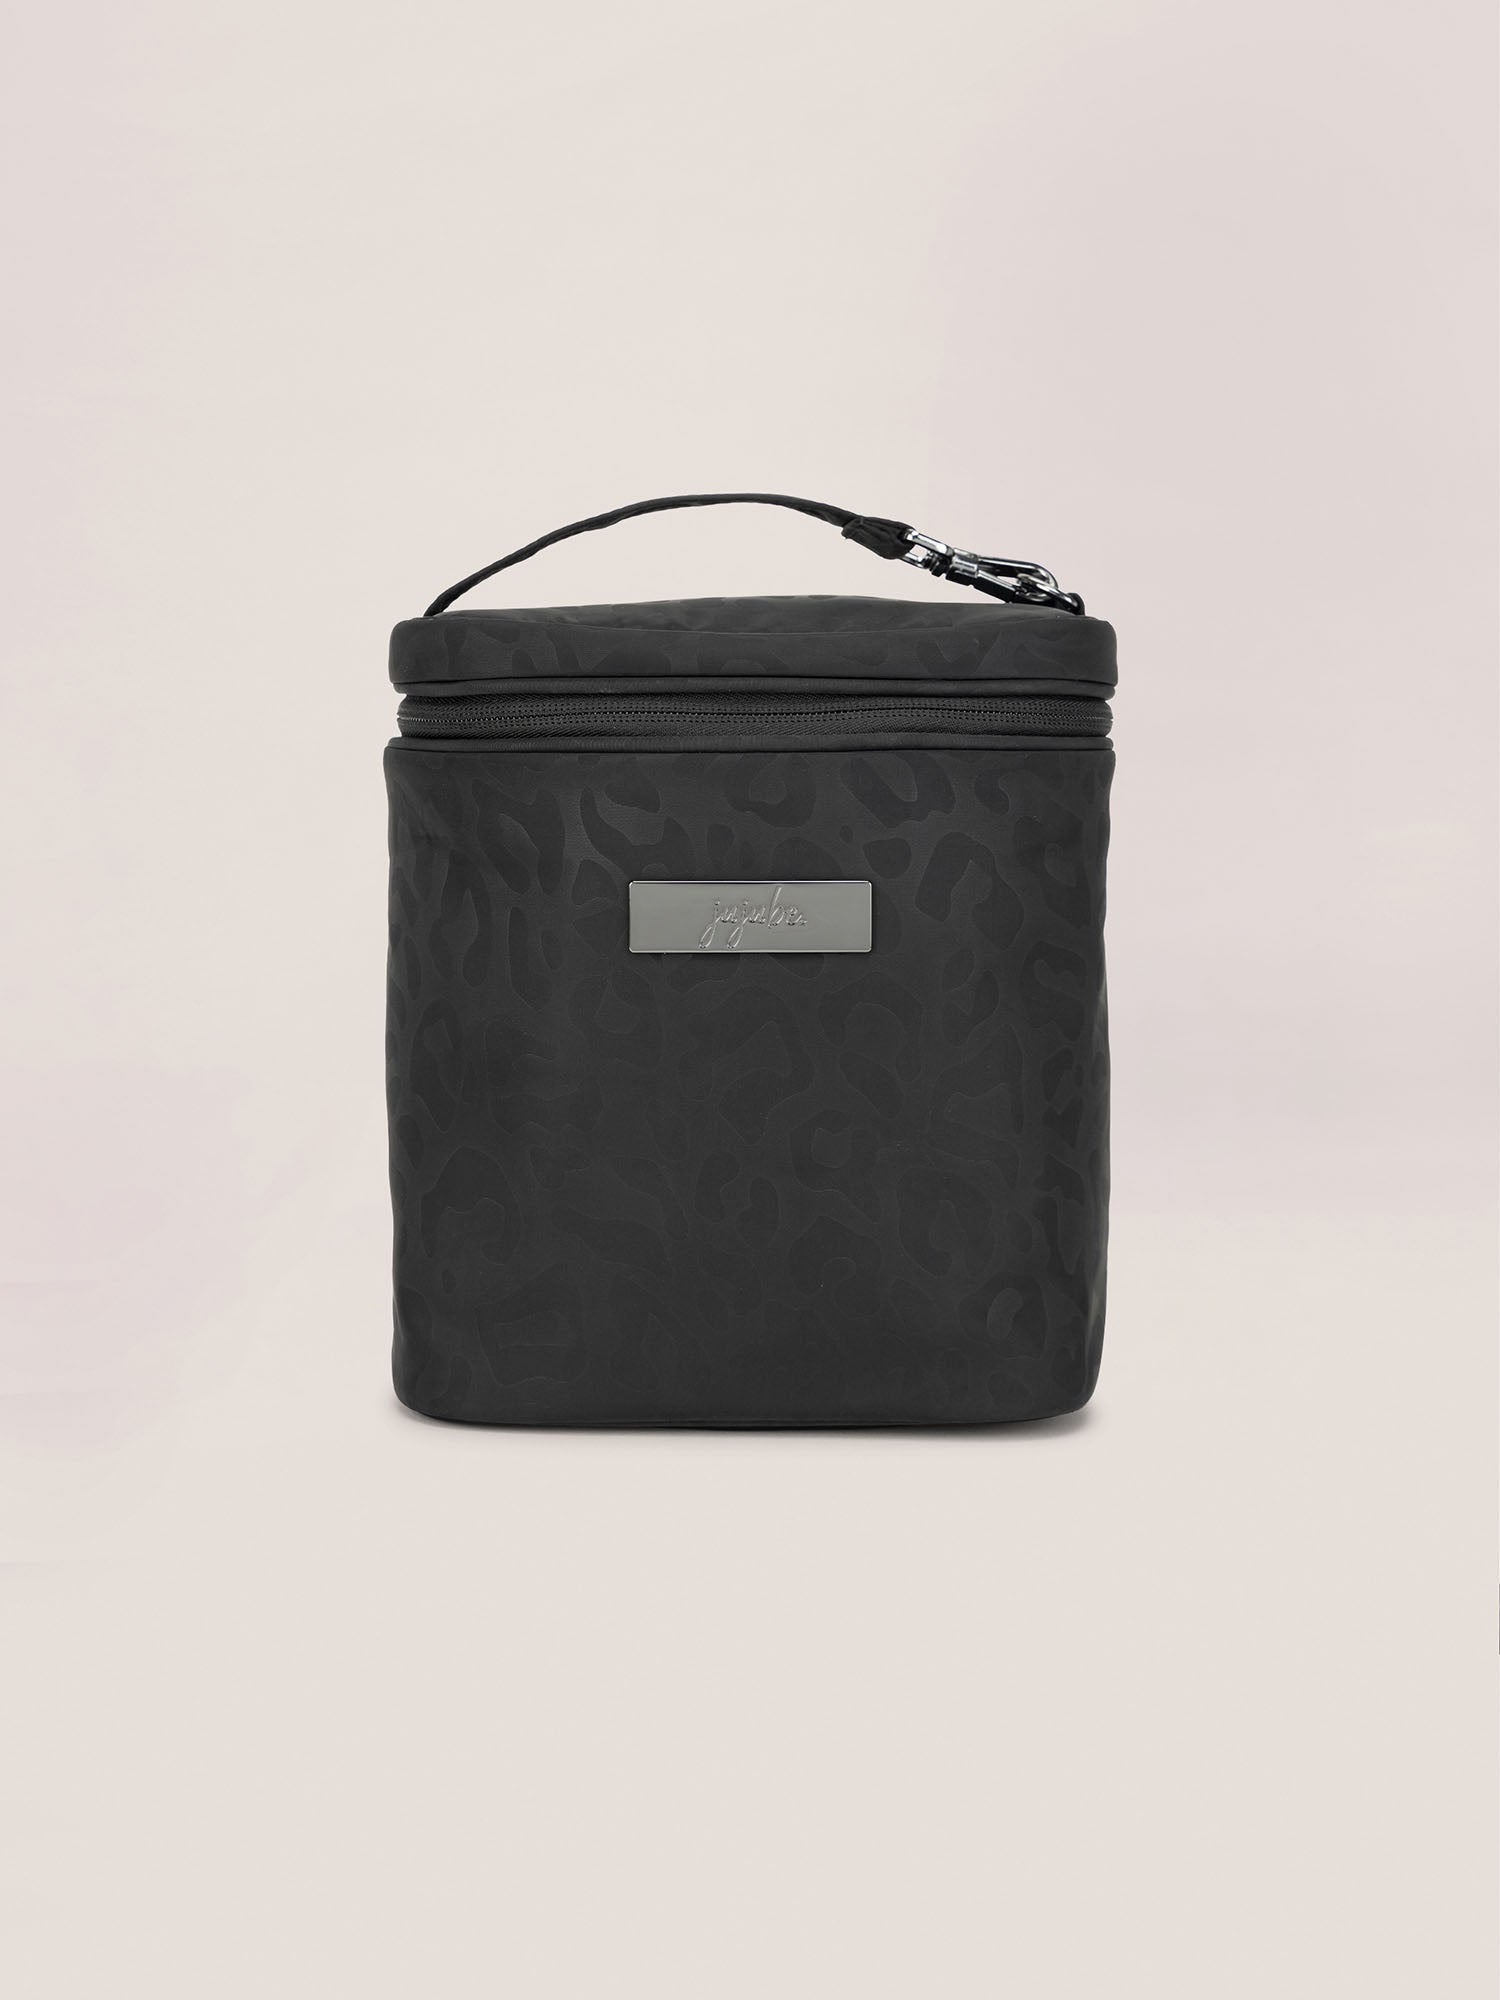 Fuel Clear Tote Bag